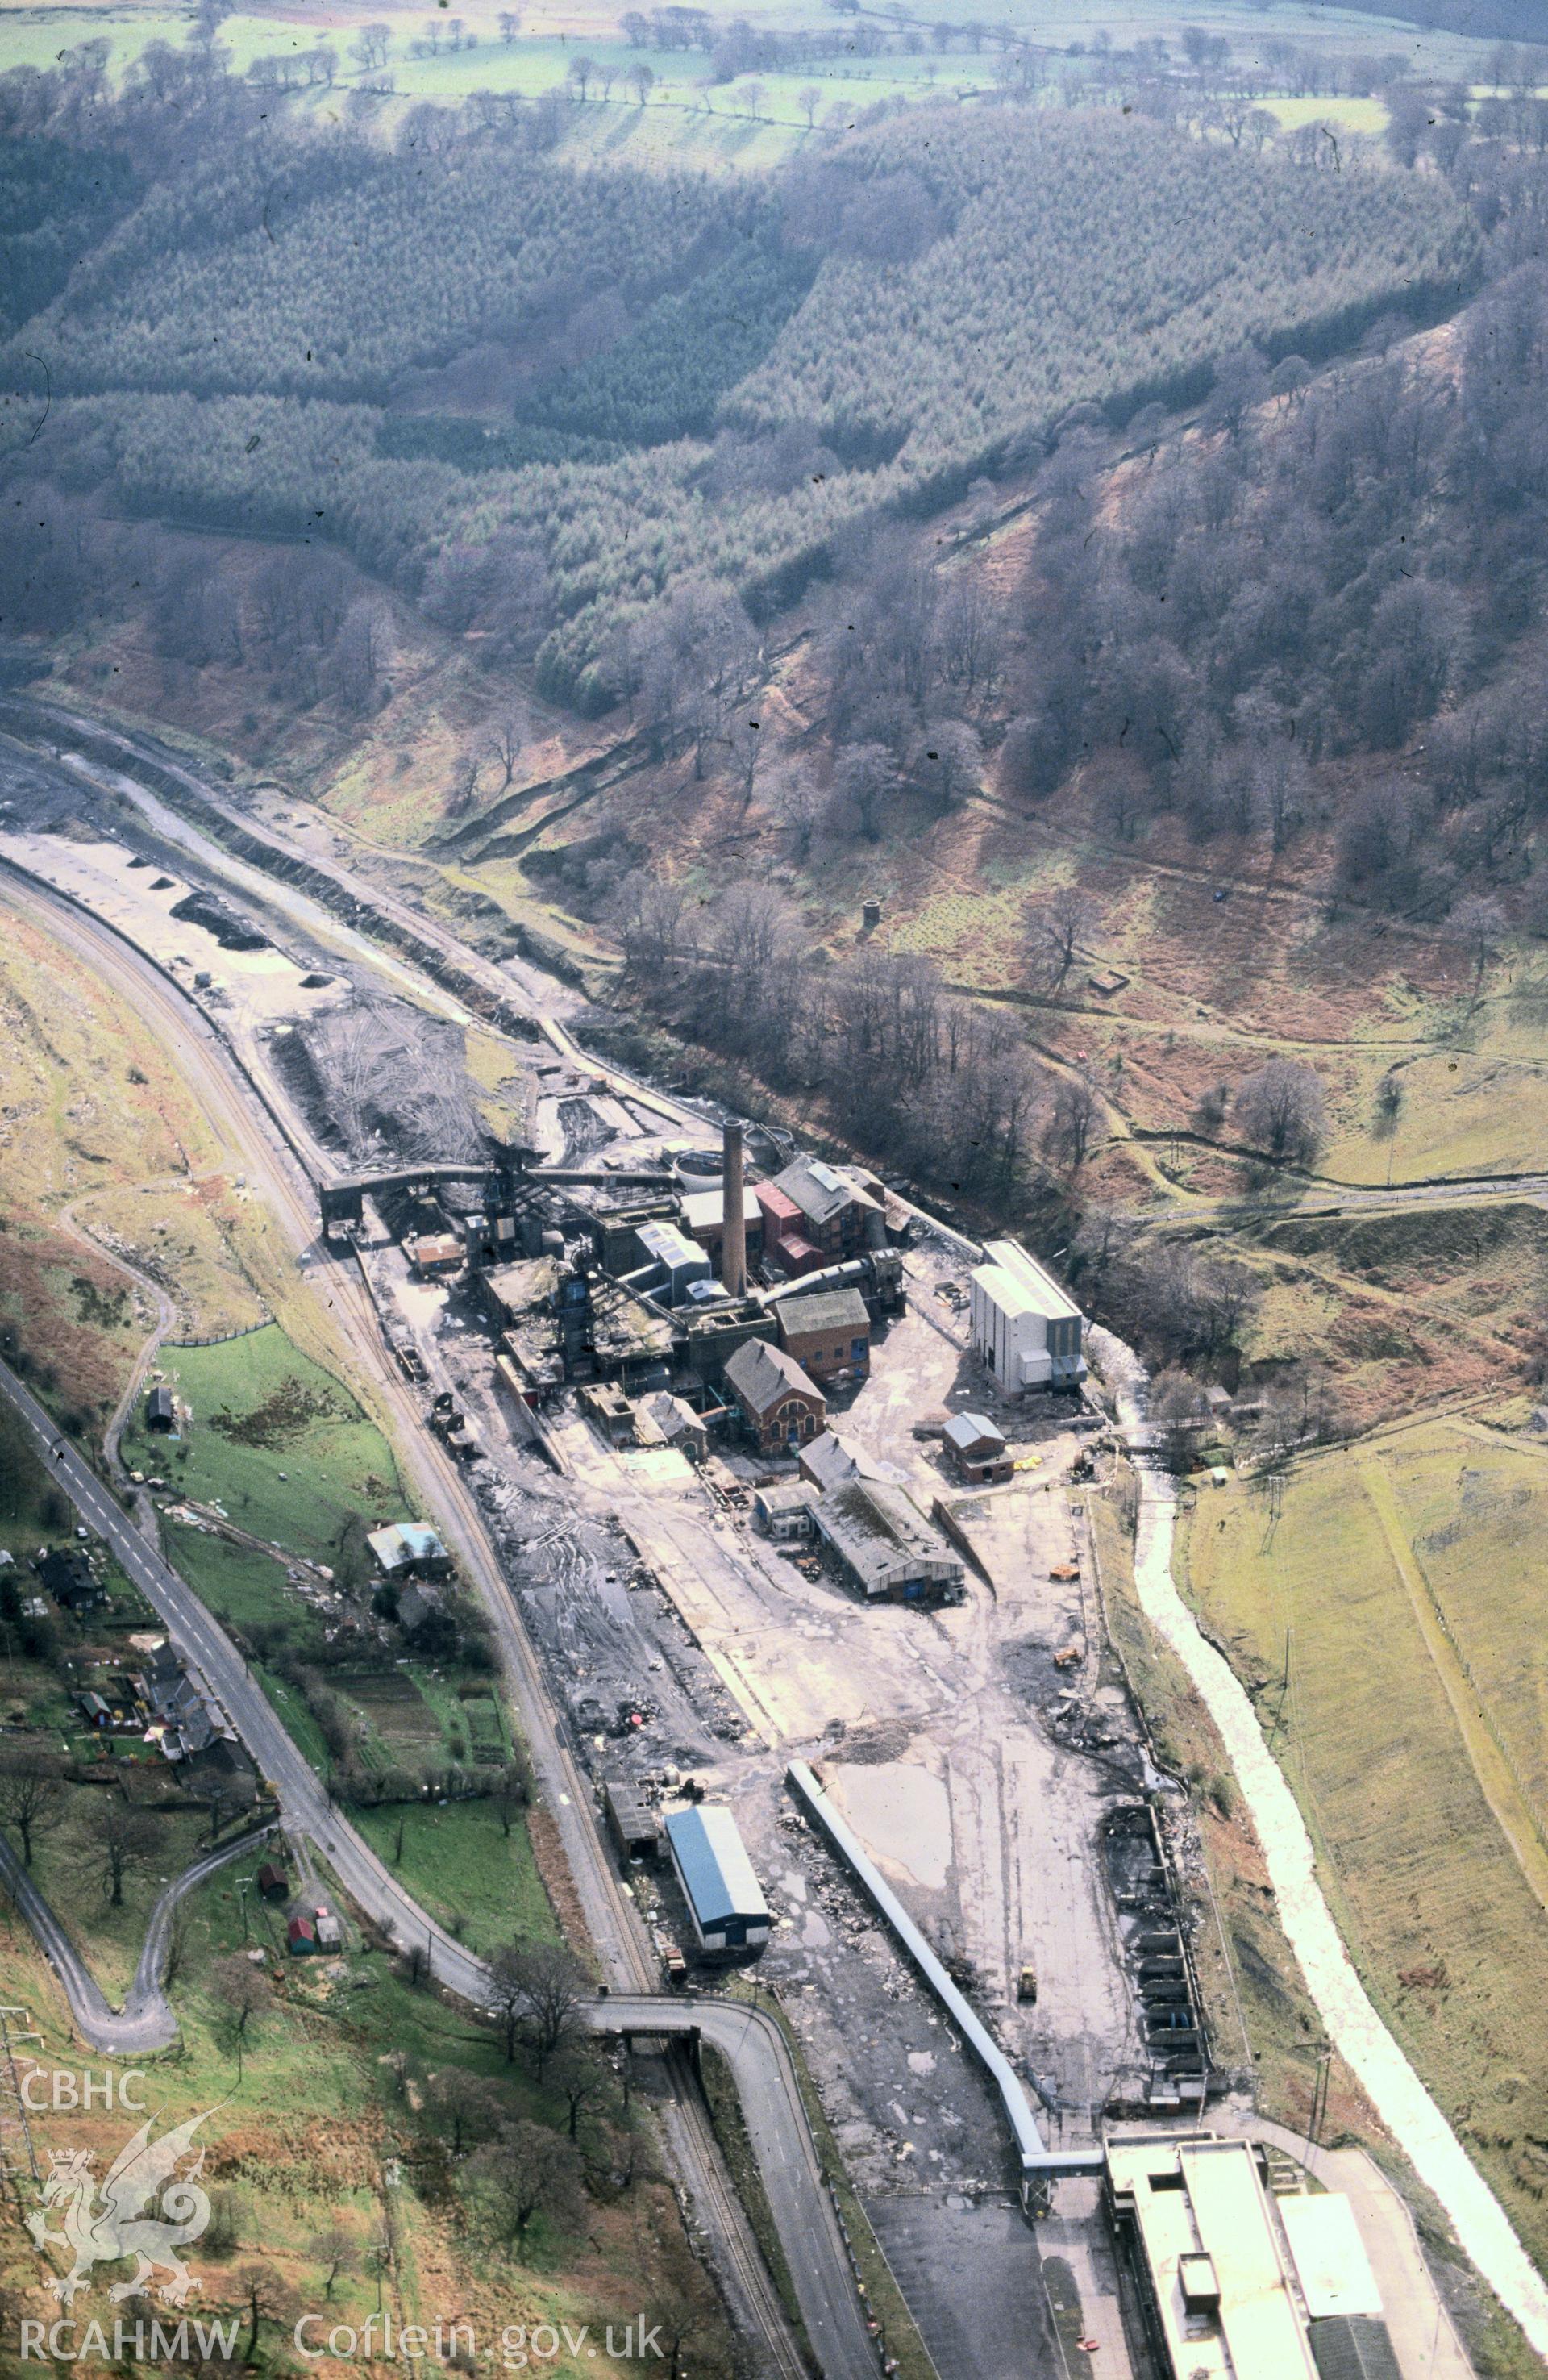 Slide of RCAHMW colour oblique aerial photograph of Marine Colliery, Cwm, taken by C.R. Musson, 26/3/1990.